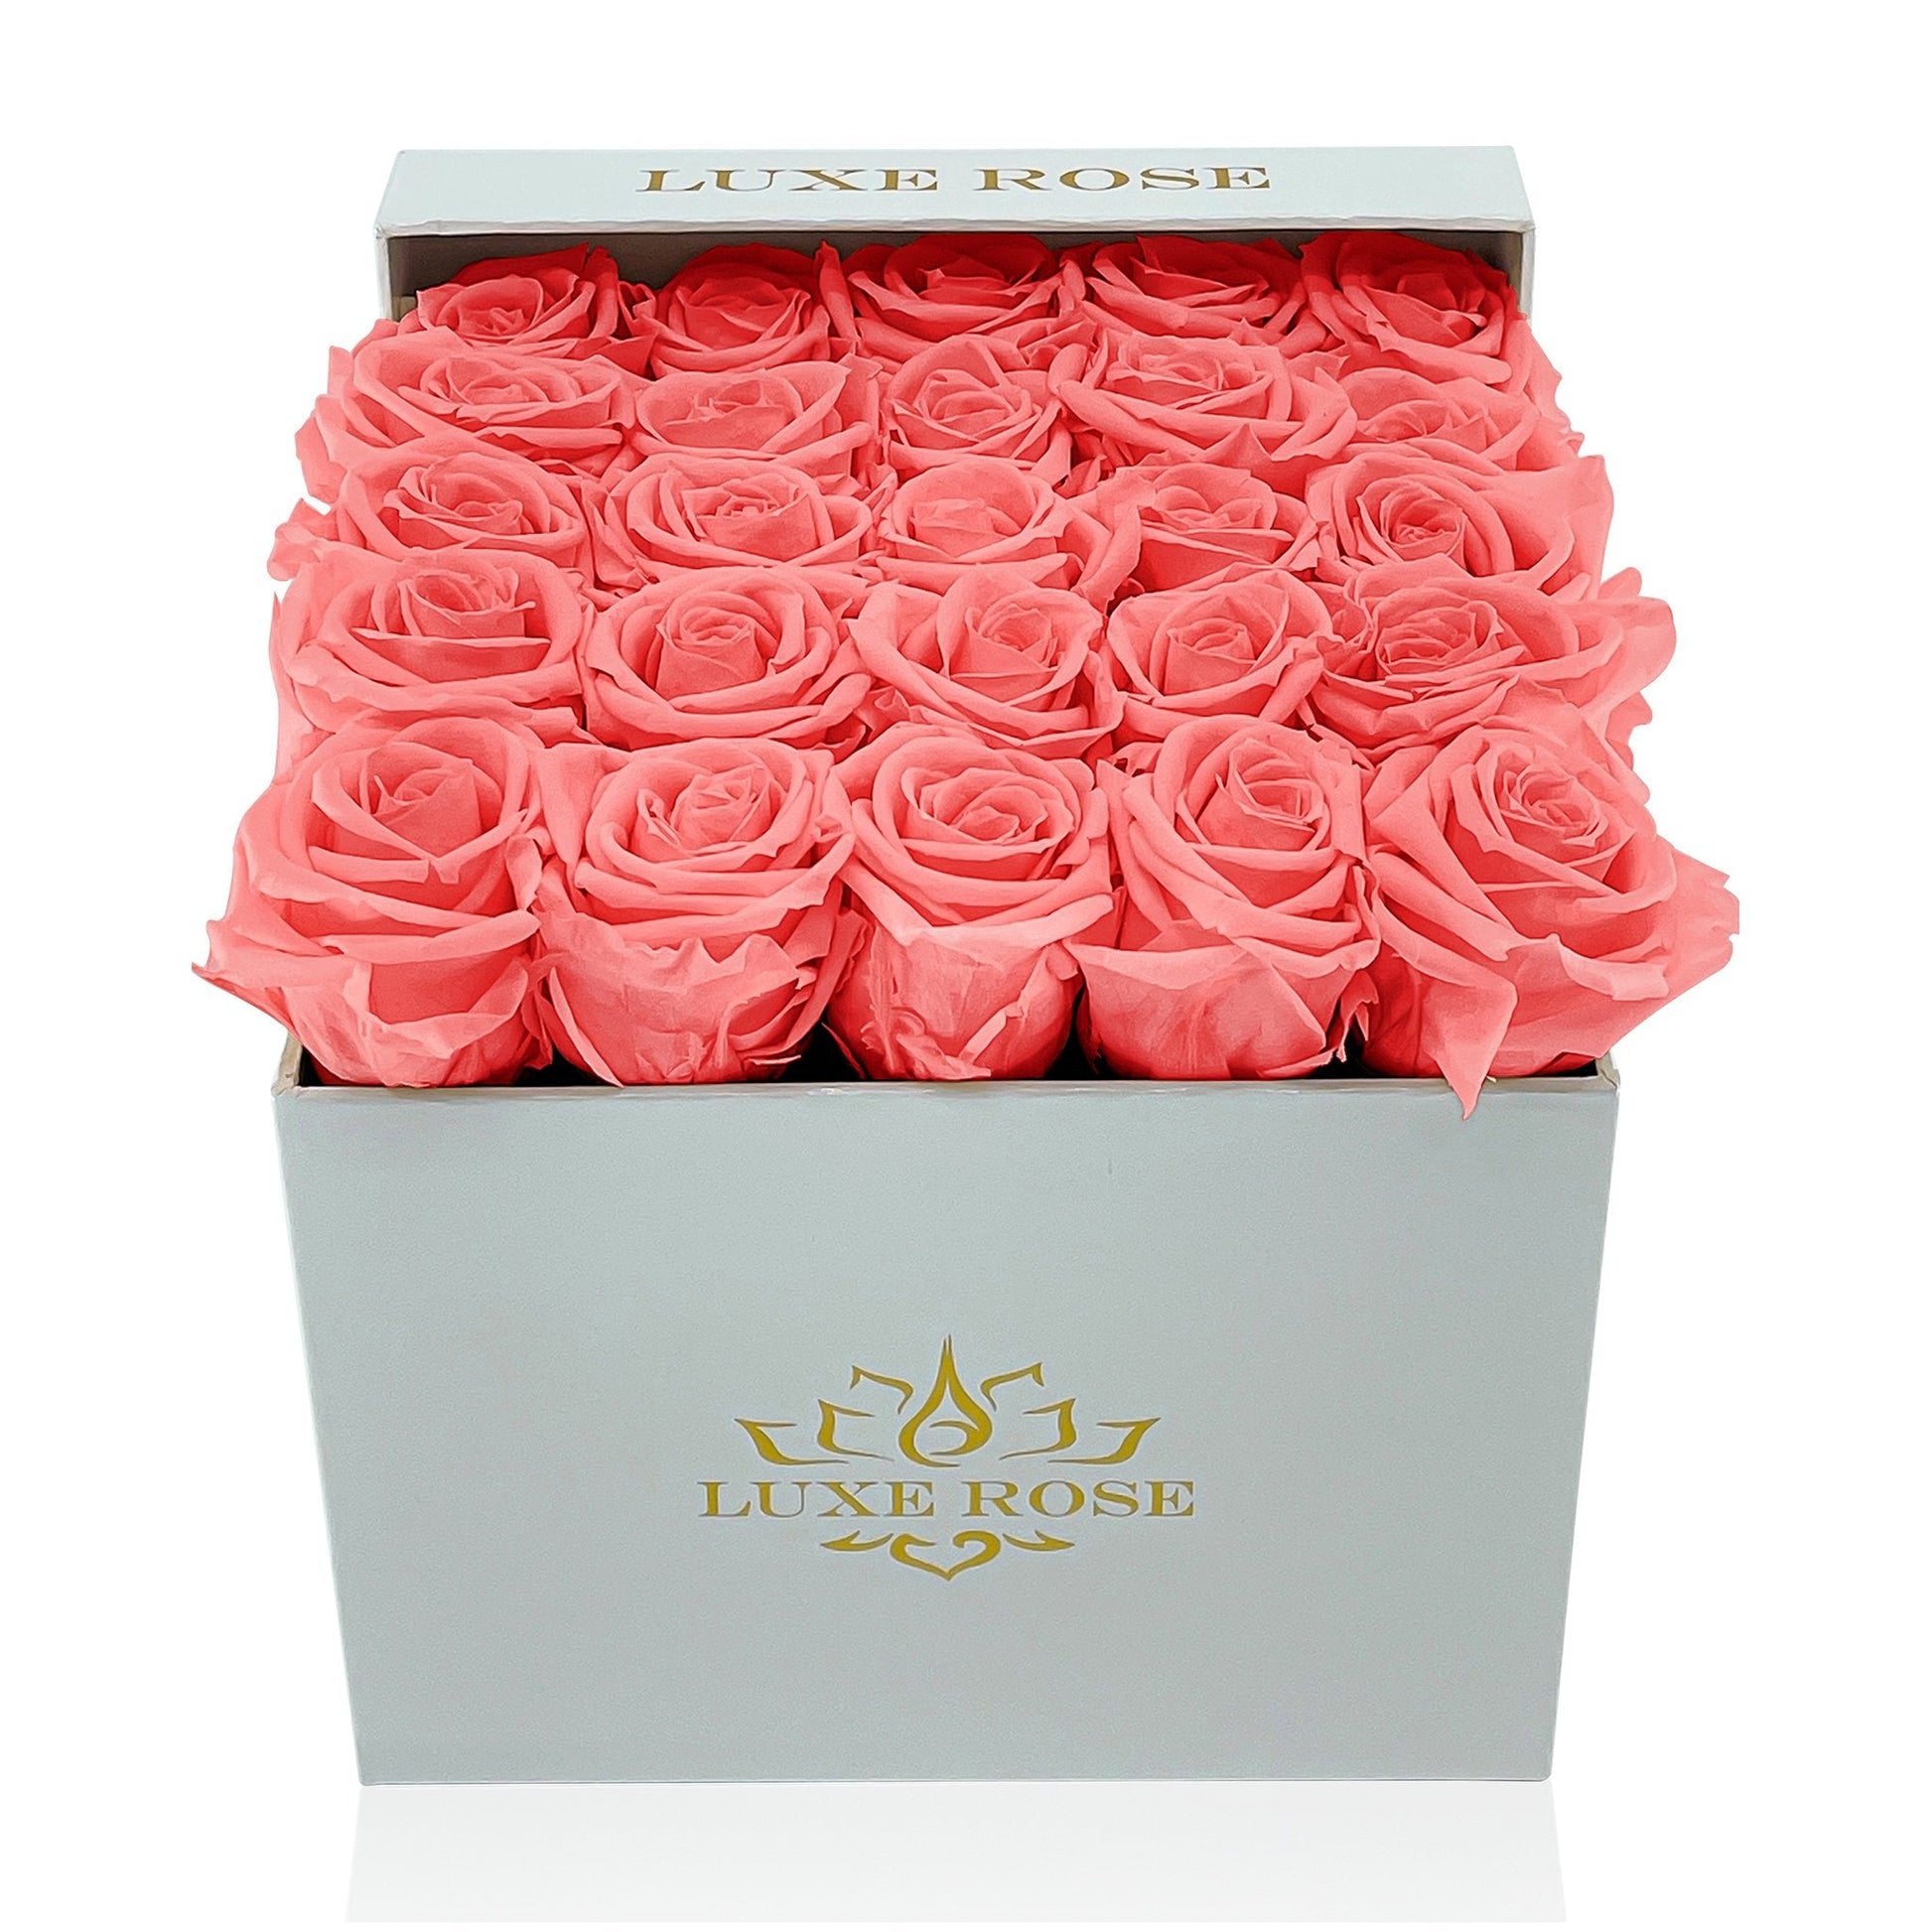 Preserved Roses Small Box | Cherry Blossom - Floral_Arrangement - Flower Delivery NYC